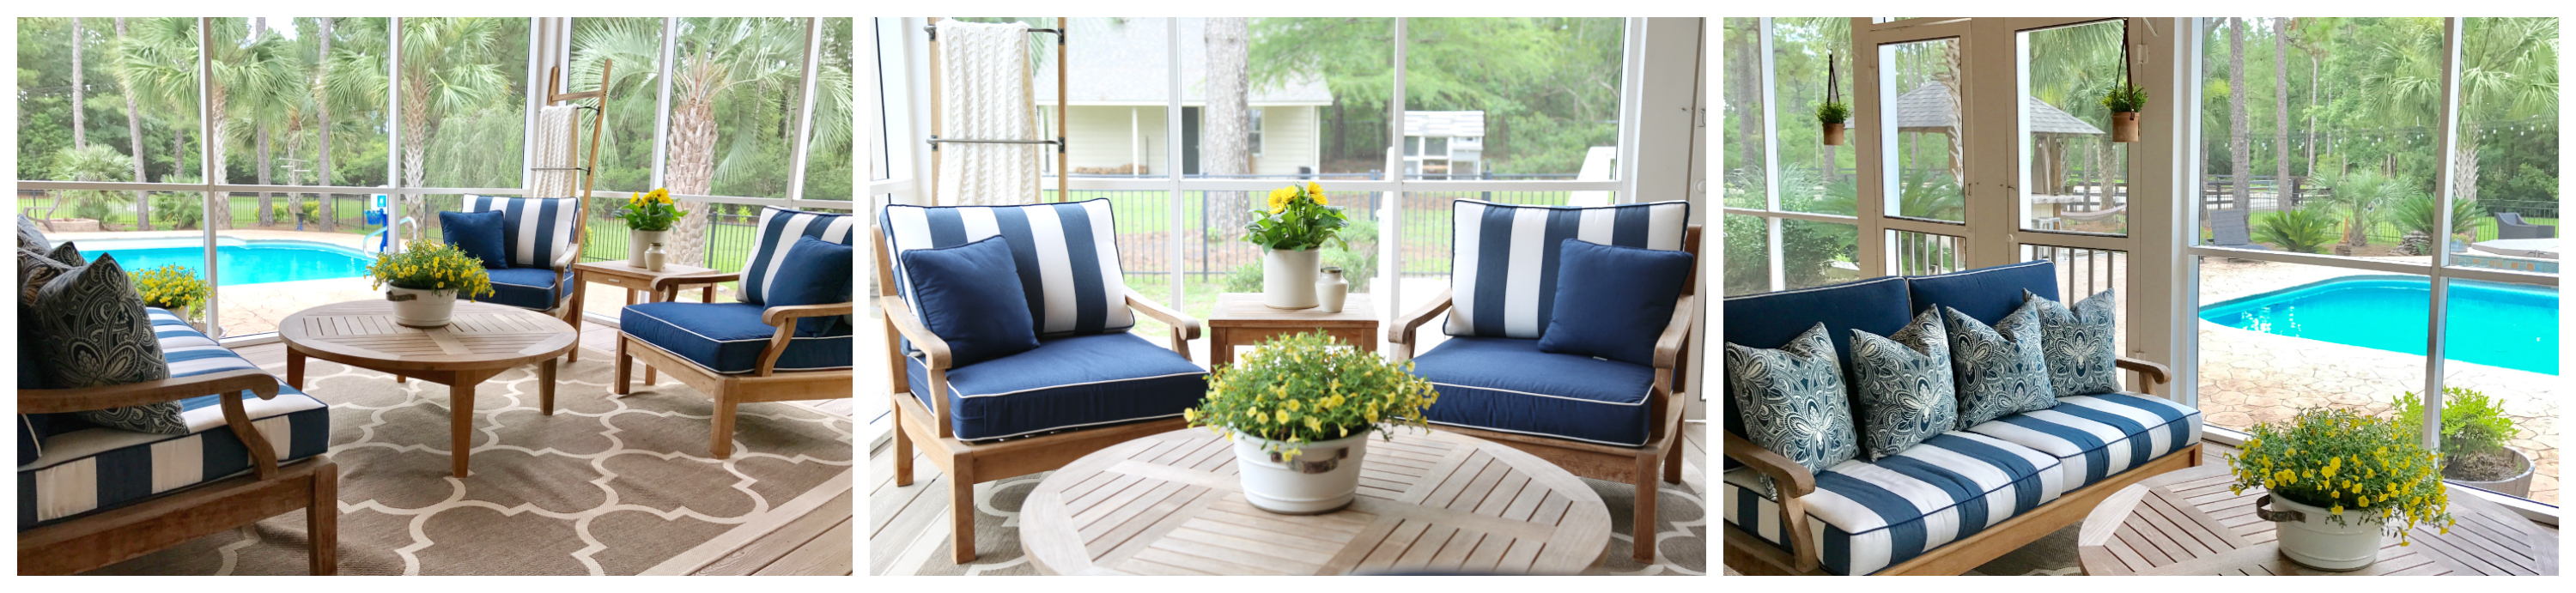 Summer Porch Seating Area